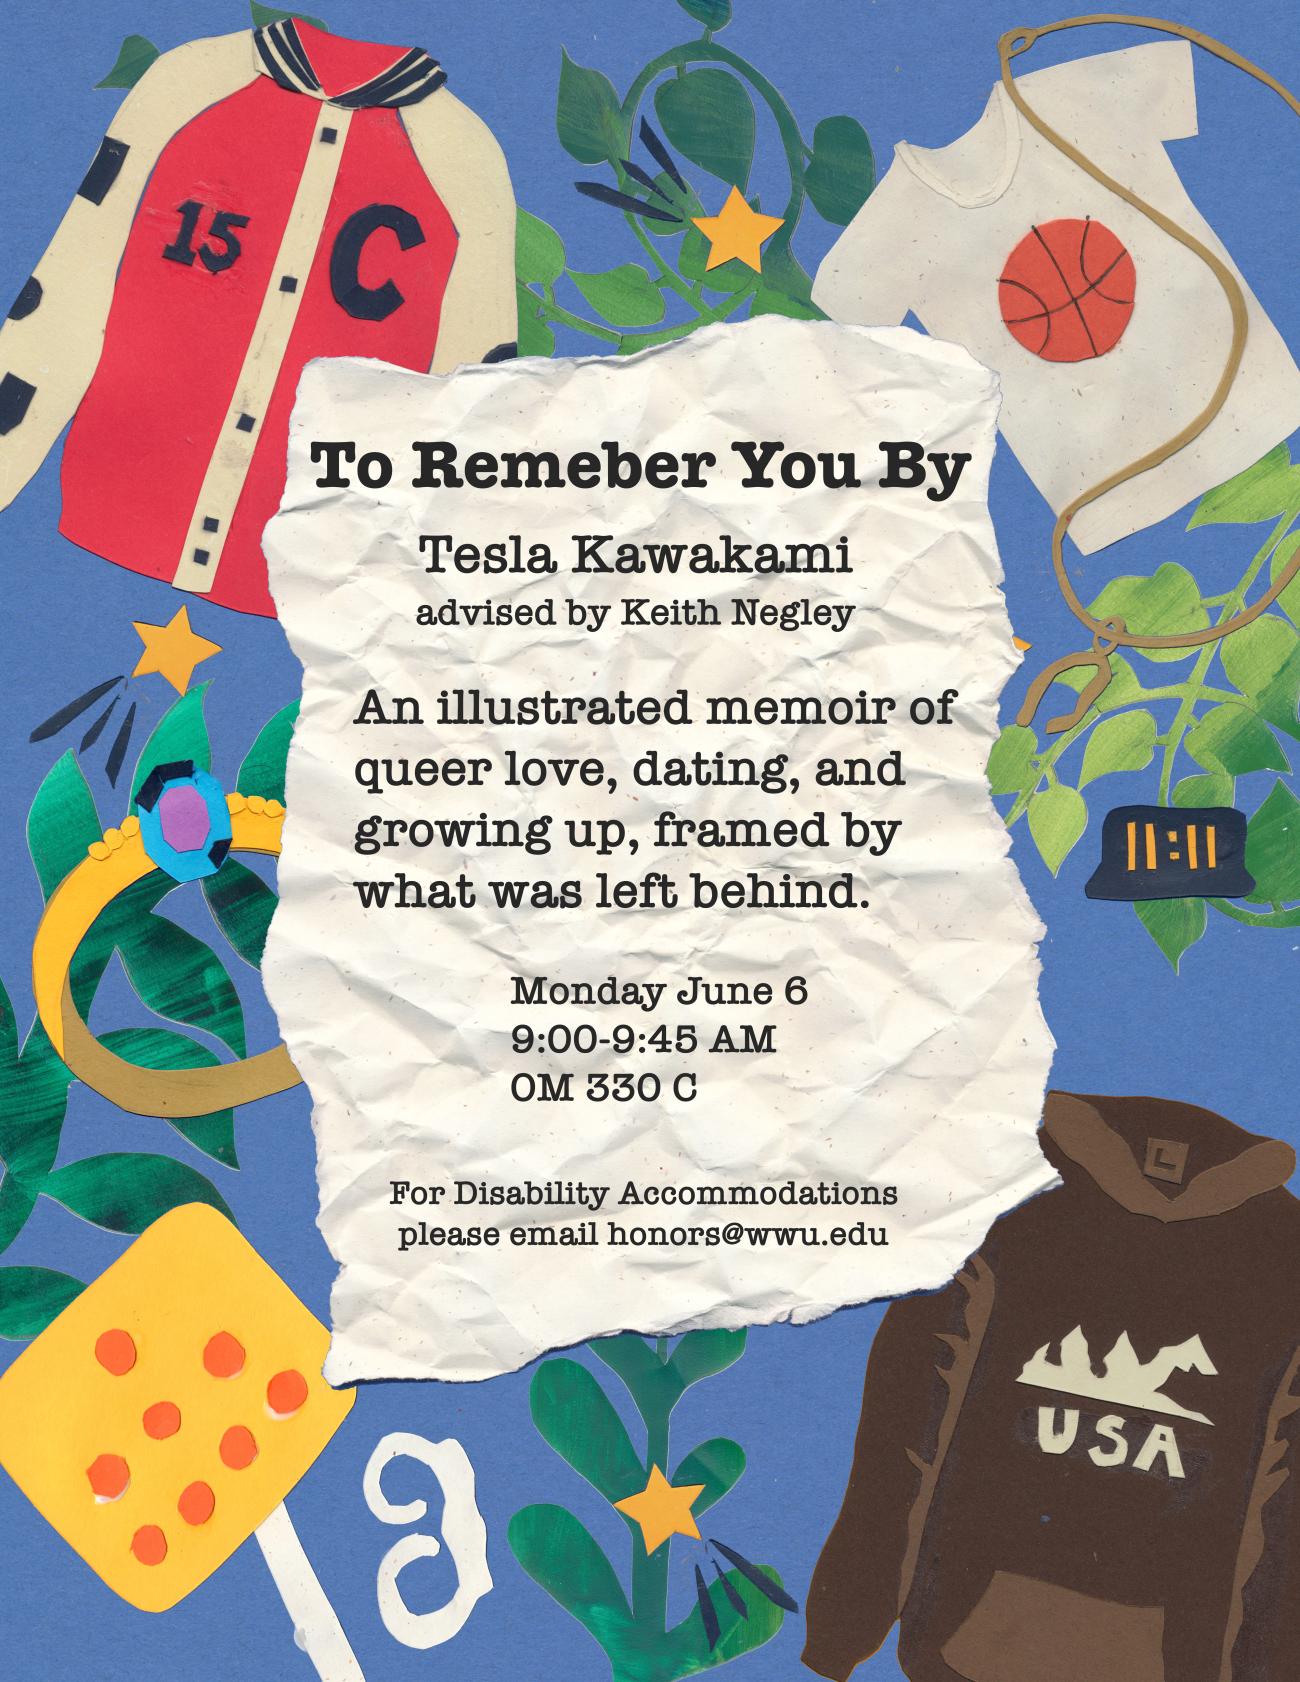 A poster with a blue background and paper collages of a shirt, two jackets, leaves, and a ring. The text reads: "To Remember You By, Tesla Kawakami advised by Keith Negley. An illustrated memoir of queer love, dating, and growing up, framed by what was left behind. Monday June 6, 9:00-9:45 AM, OM 330C. For Disability Accommodations please email honors@wwu.edu."